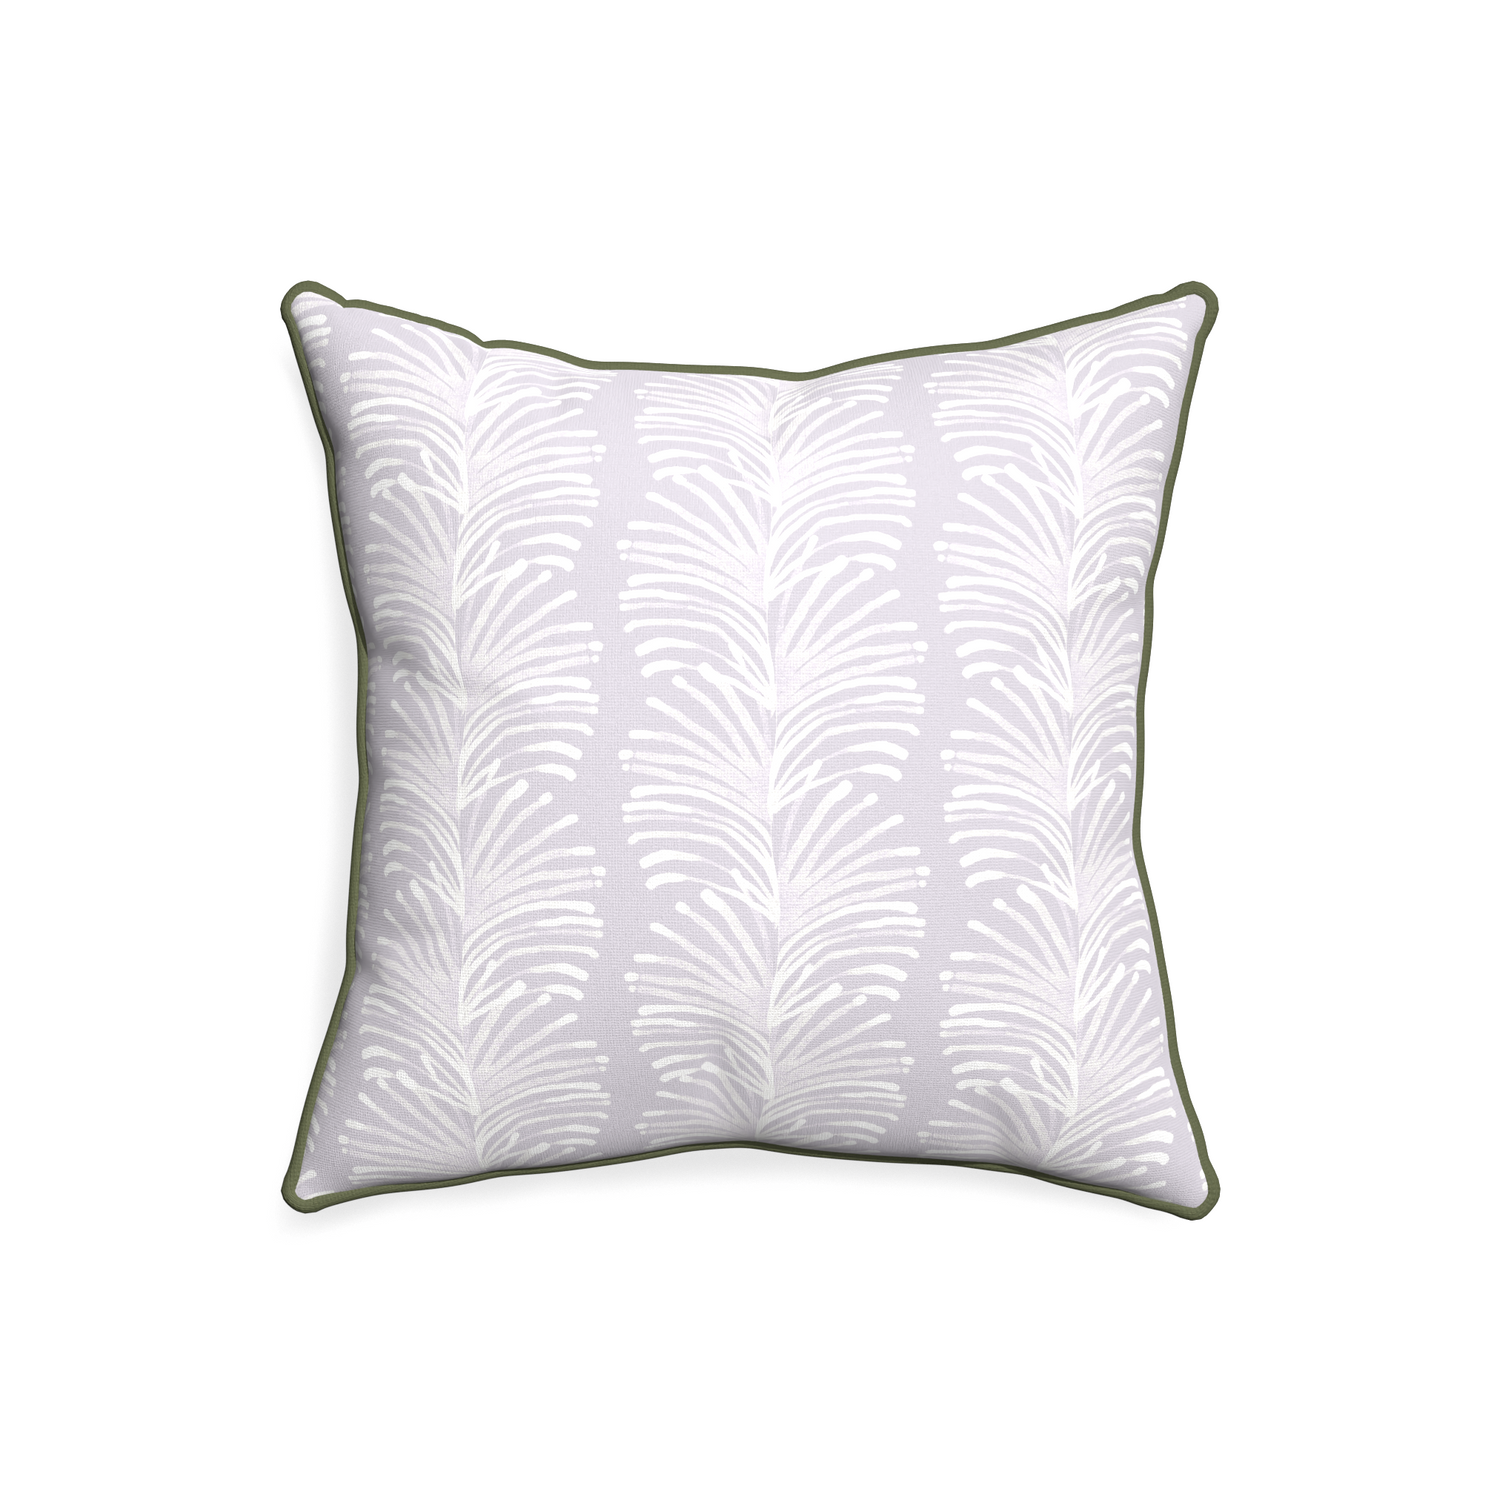 20-square emma lavender custom pillow with f piping on white background